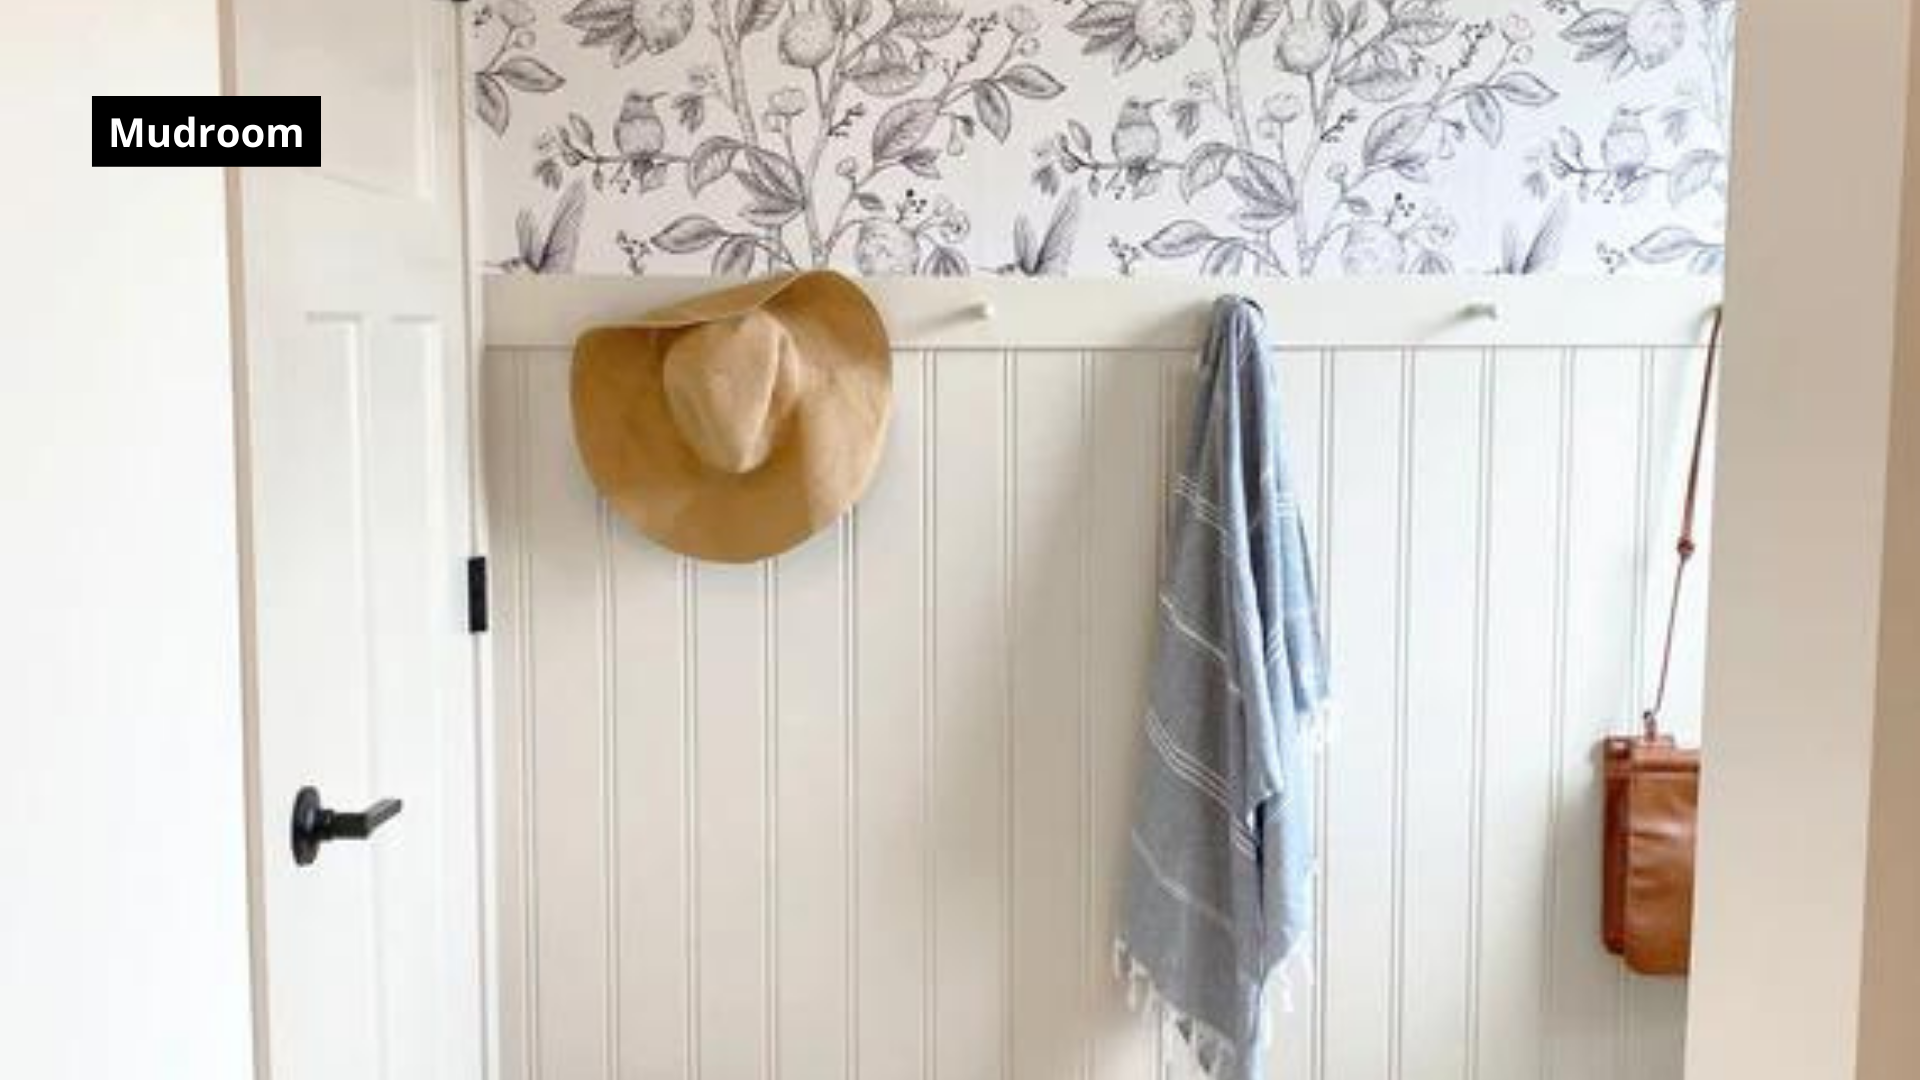 Peel and stick wallpaper for Mudroom wall